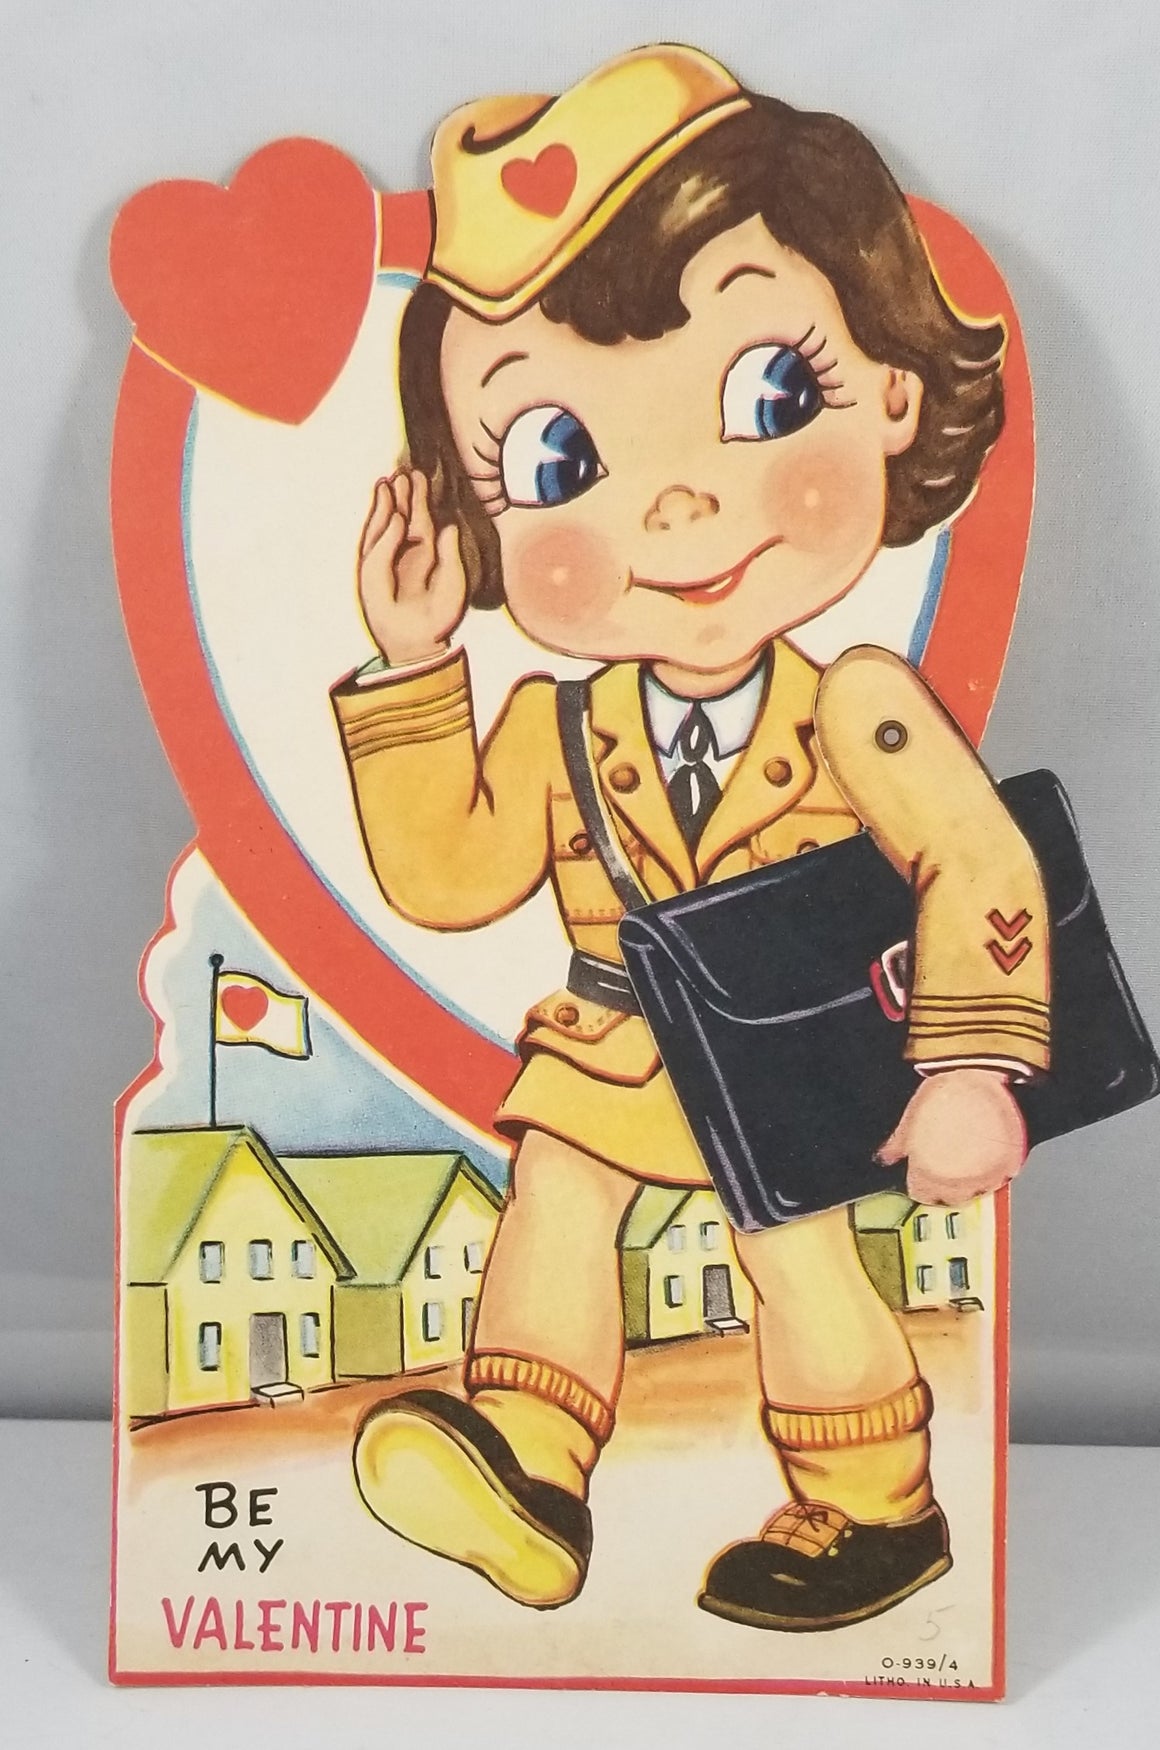 Vintage Antique Mechanical Valentine Card Young Girl in Army Dress Carrying Case at Barrick's Arm Swings